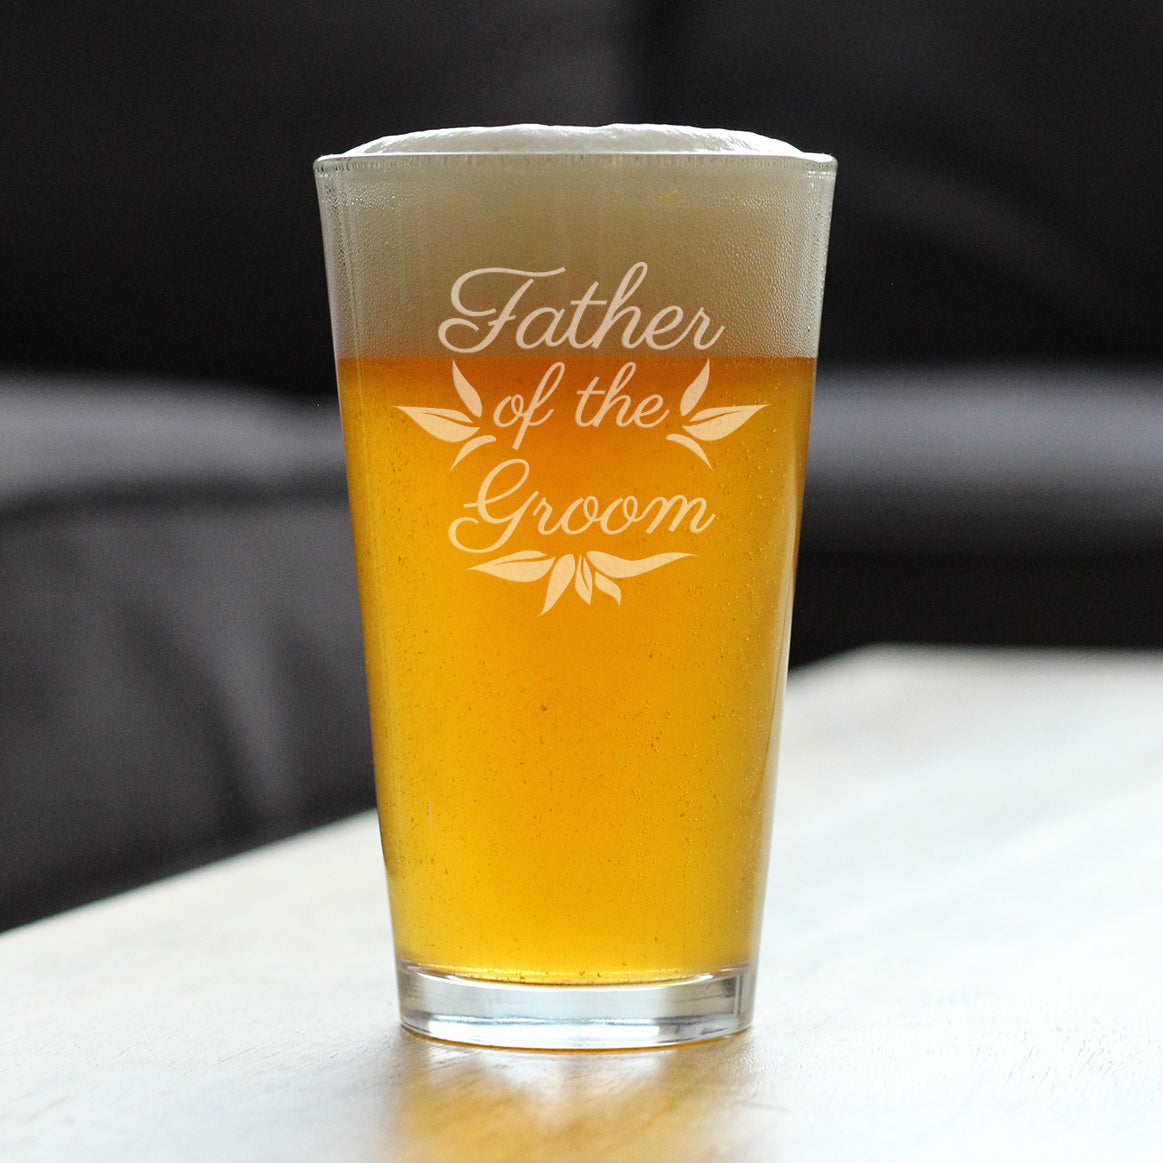 Father of the Groom Pint Glass - Unique Wedding Gift for Soon to Be Father-in-Law - Cute Engraved Wedding Cup Gift